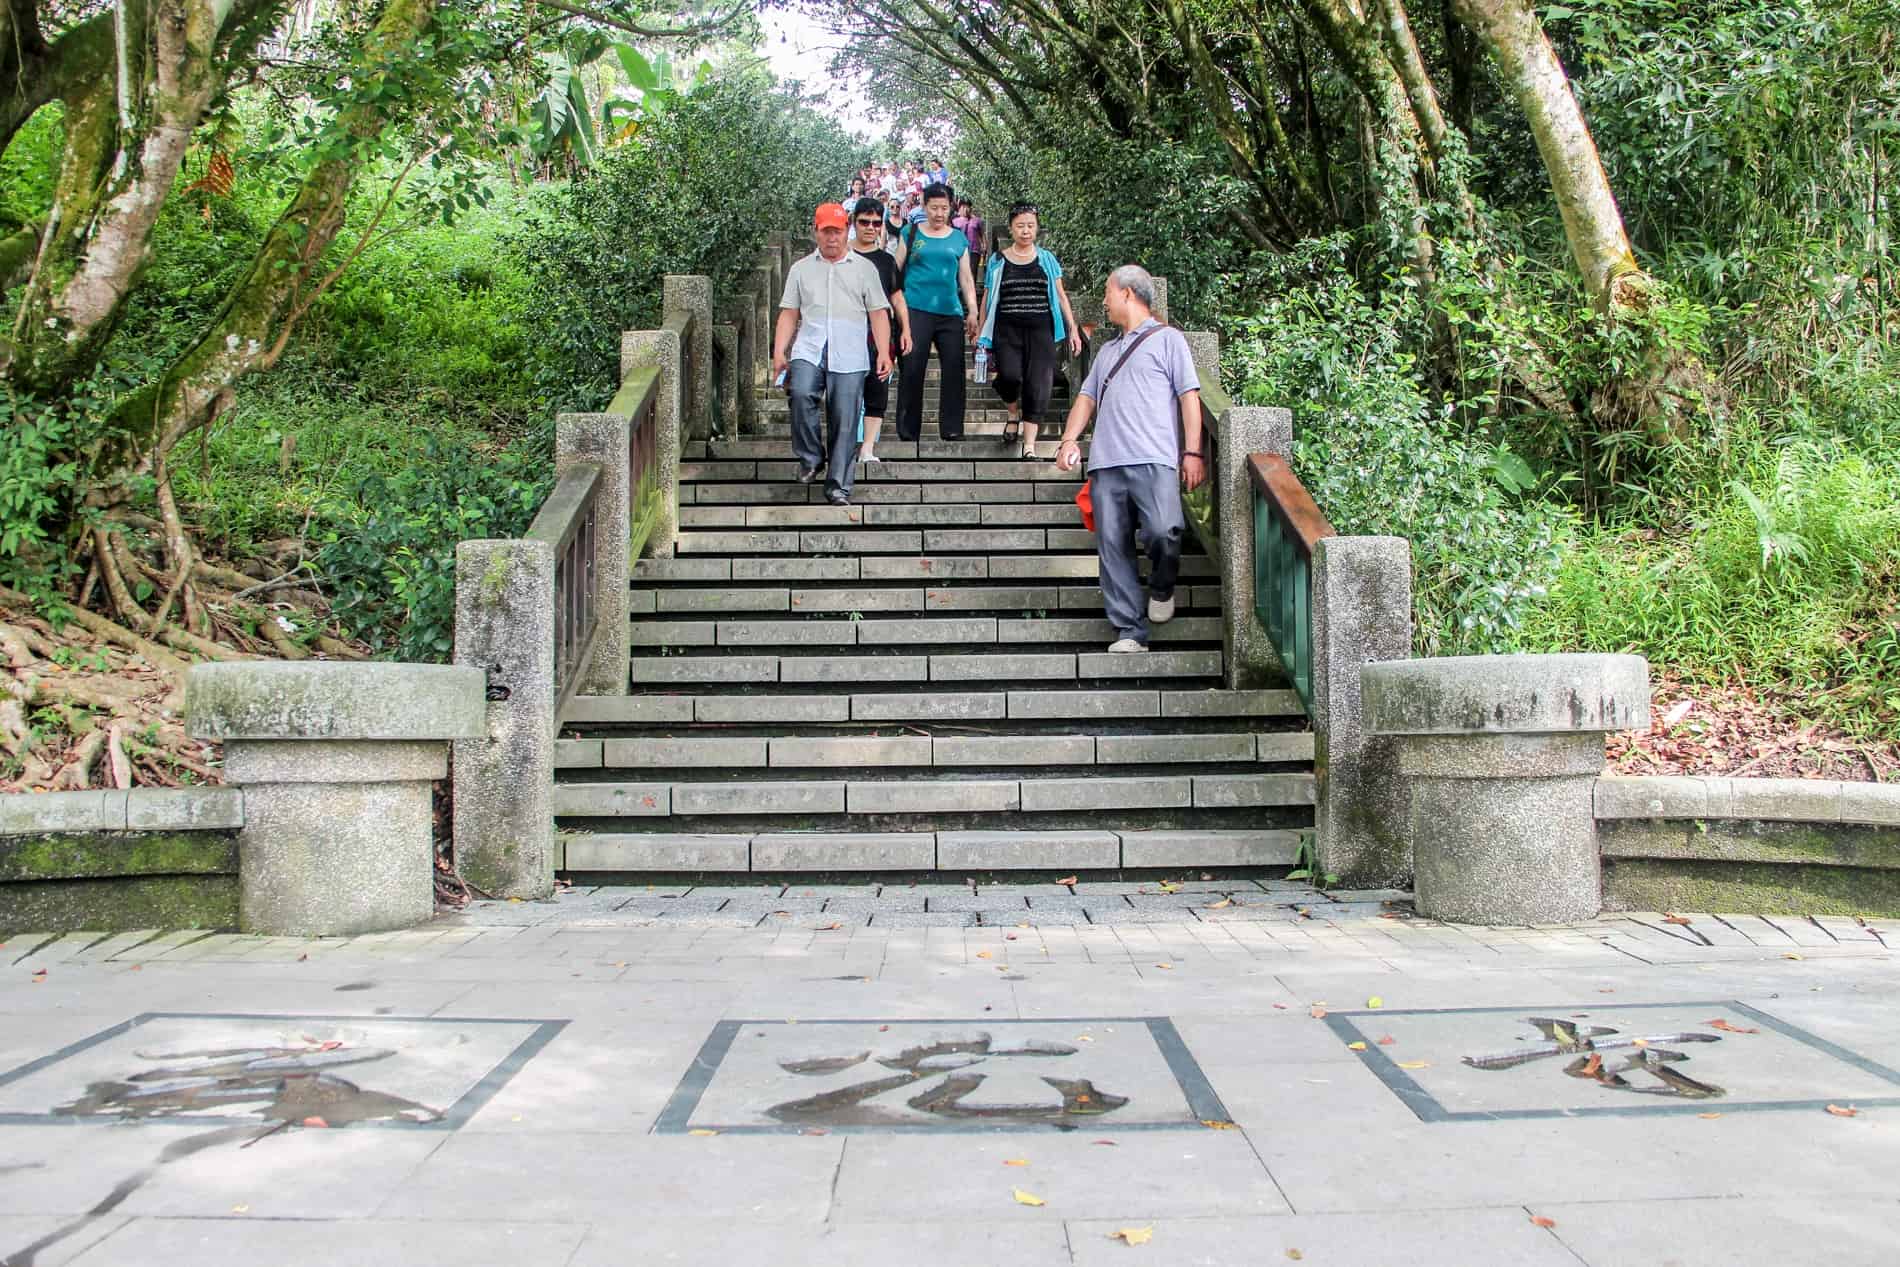 A group of visitors walking down stairs in a woodland. Chinese characters can be seen on the paving stones at the bottom. 